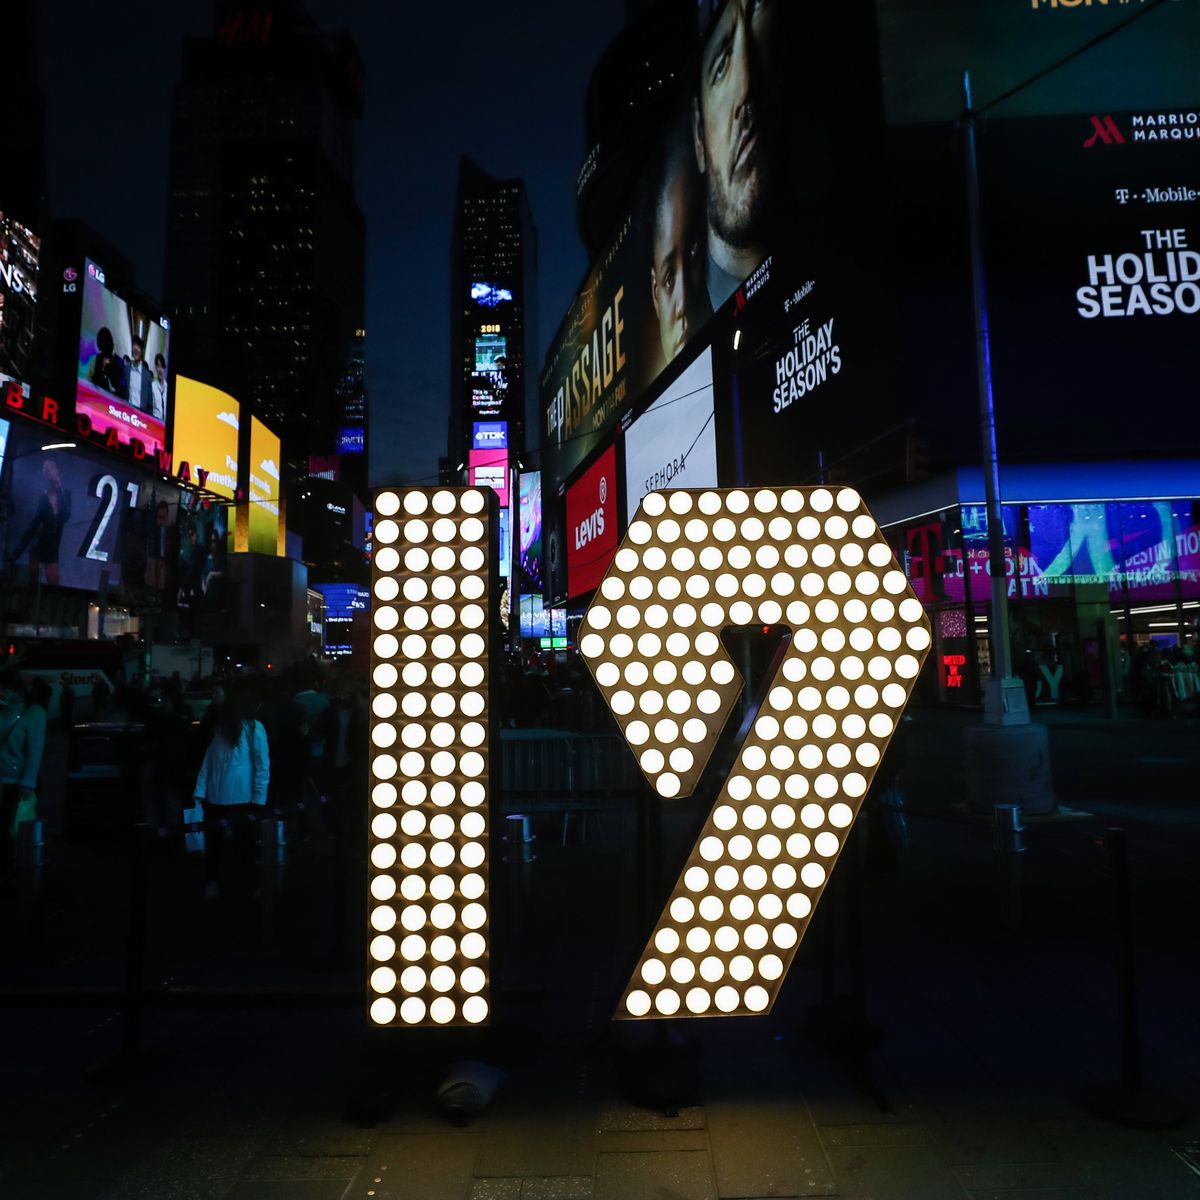 Numerals For Times Square New Year's Eve Celebration Are Delivered To Times Square